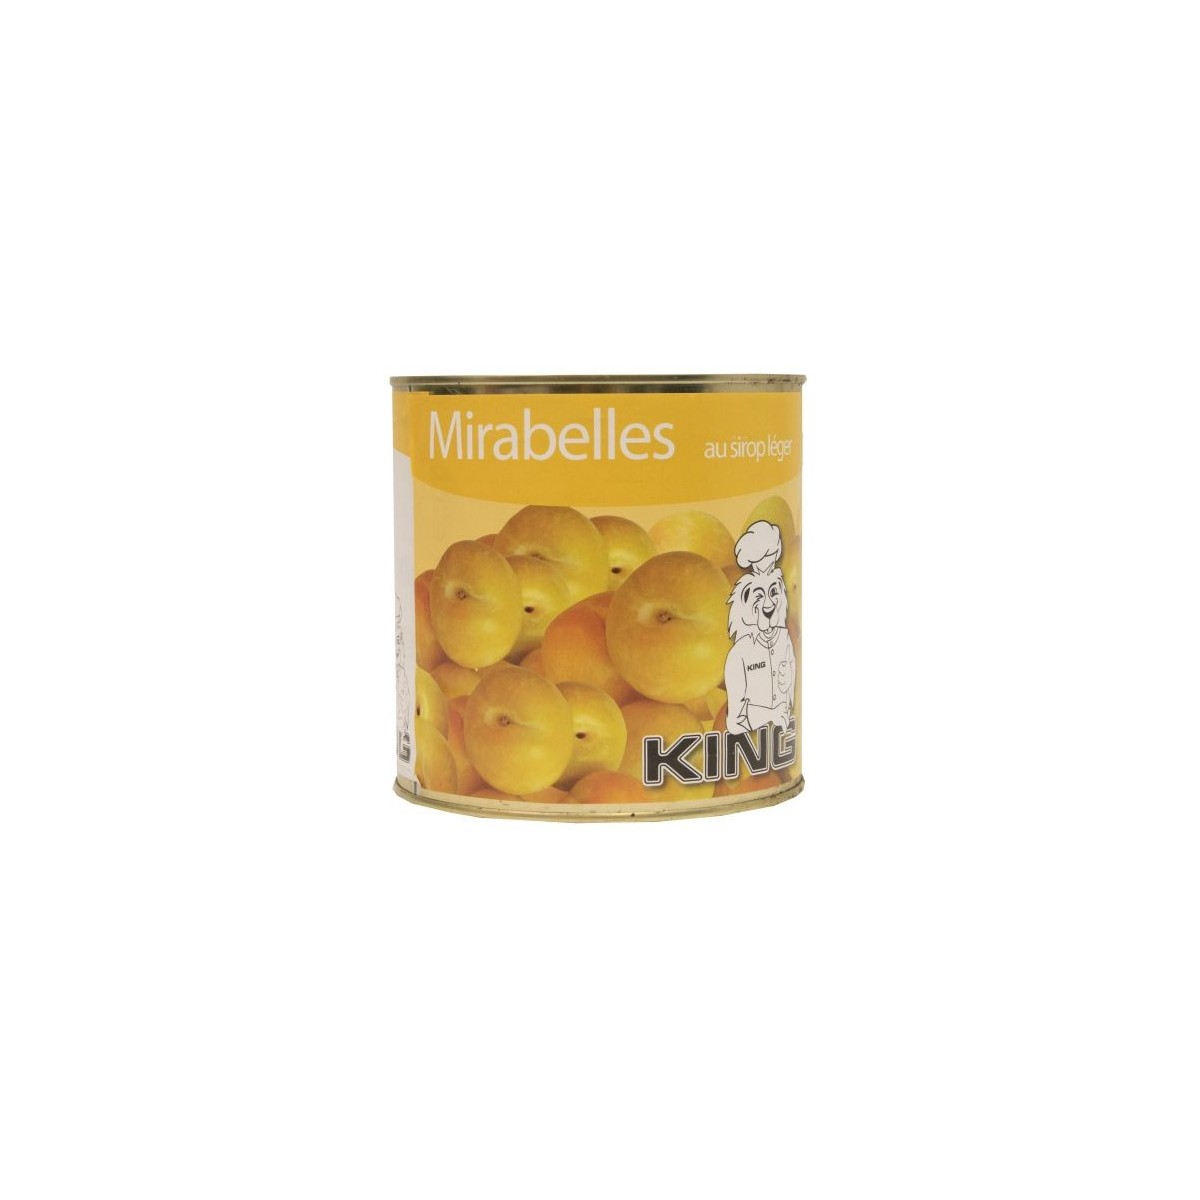 MIRABELLES IN LIGHT SYRUP KING 6 X 3KG  BOX